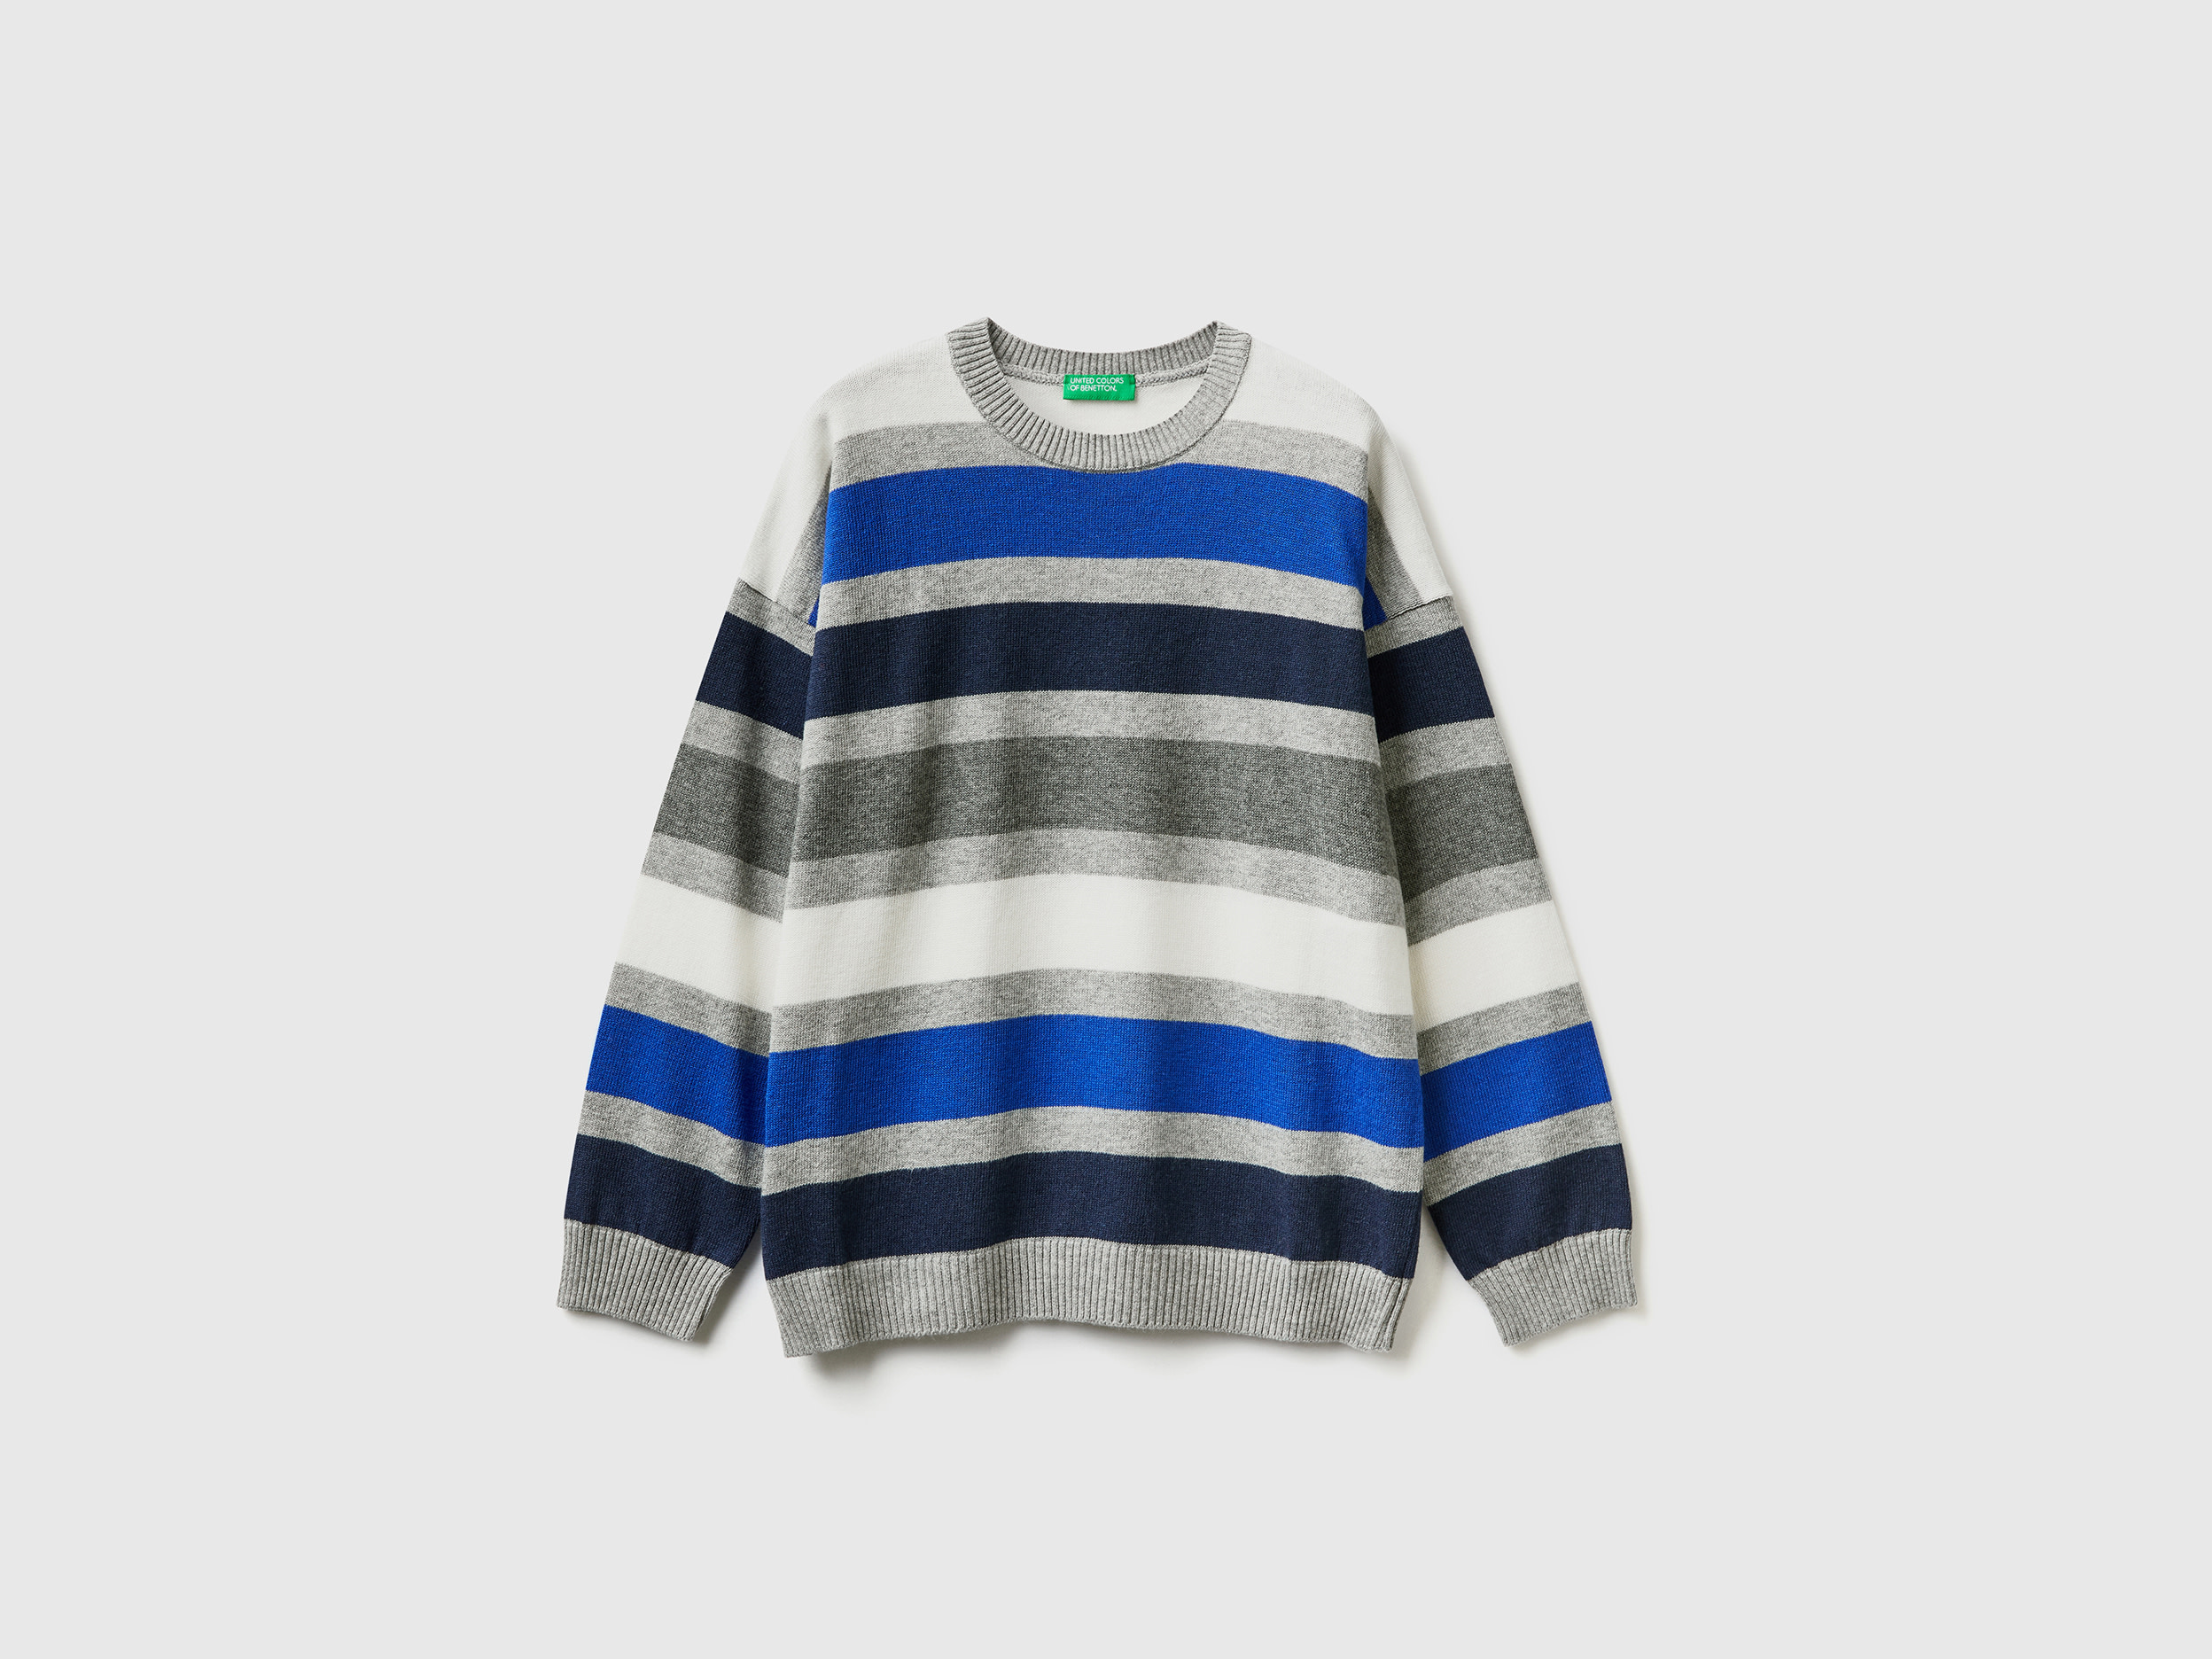 Benetton, Striped Sweater In Wool And Cotton Blend, size S, Light Gray, Kids